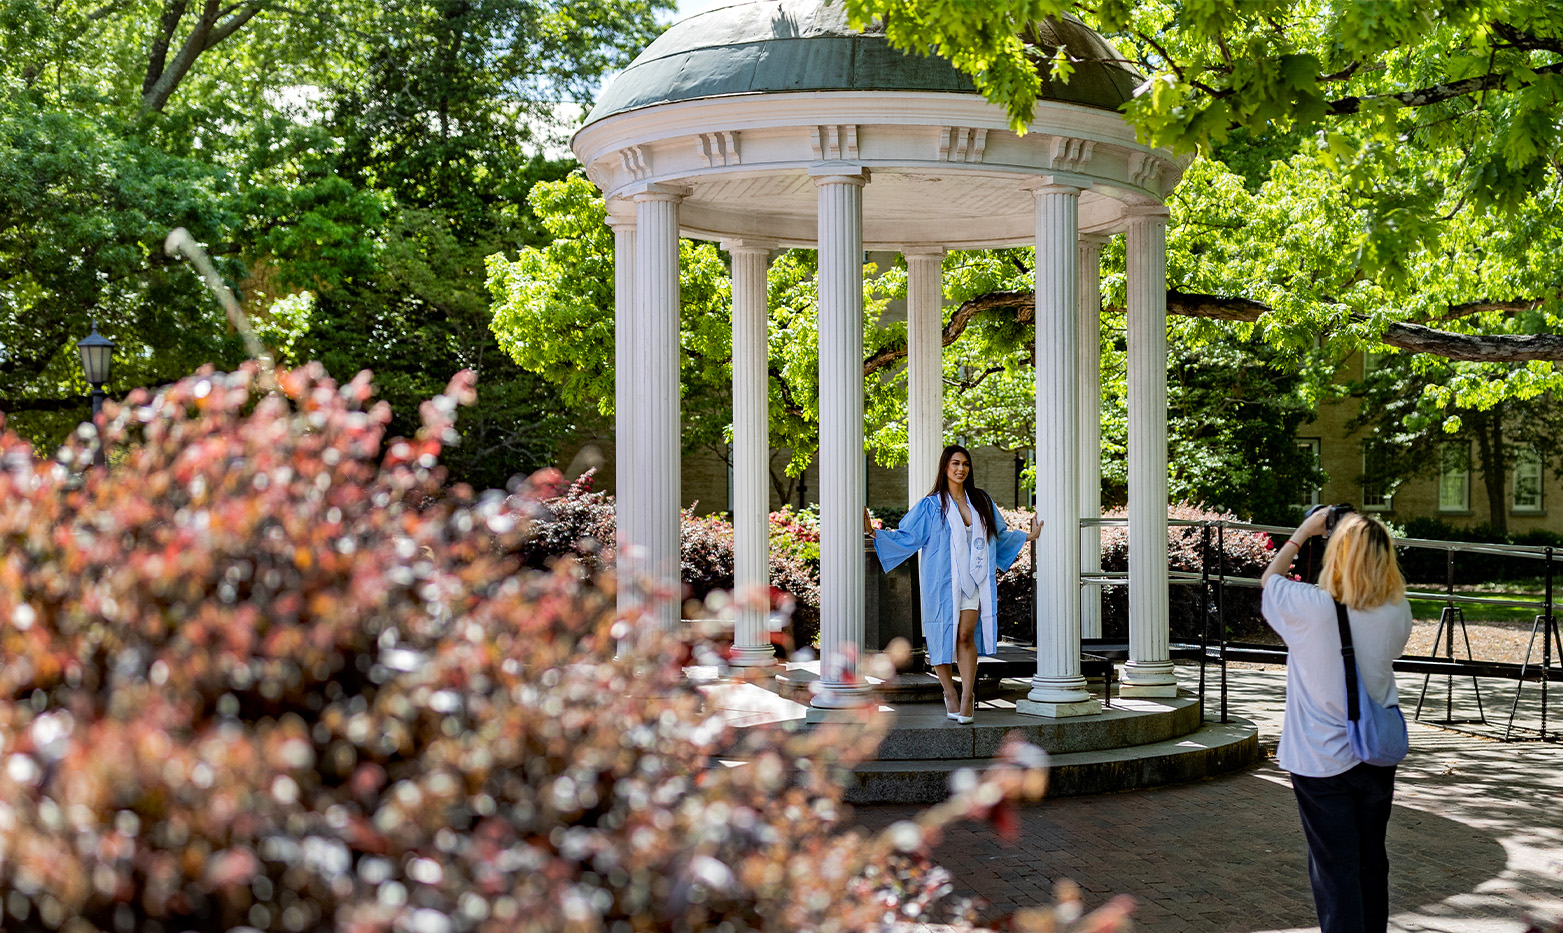 A UNC student poses by the old well in graduation regalia.